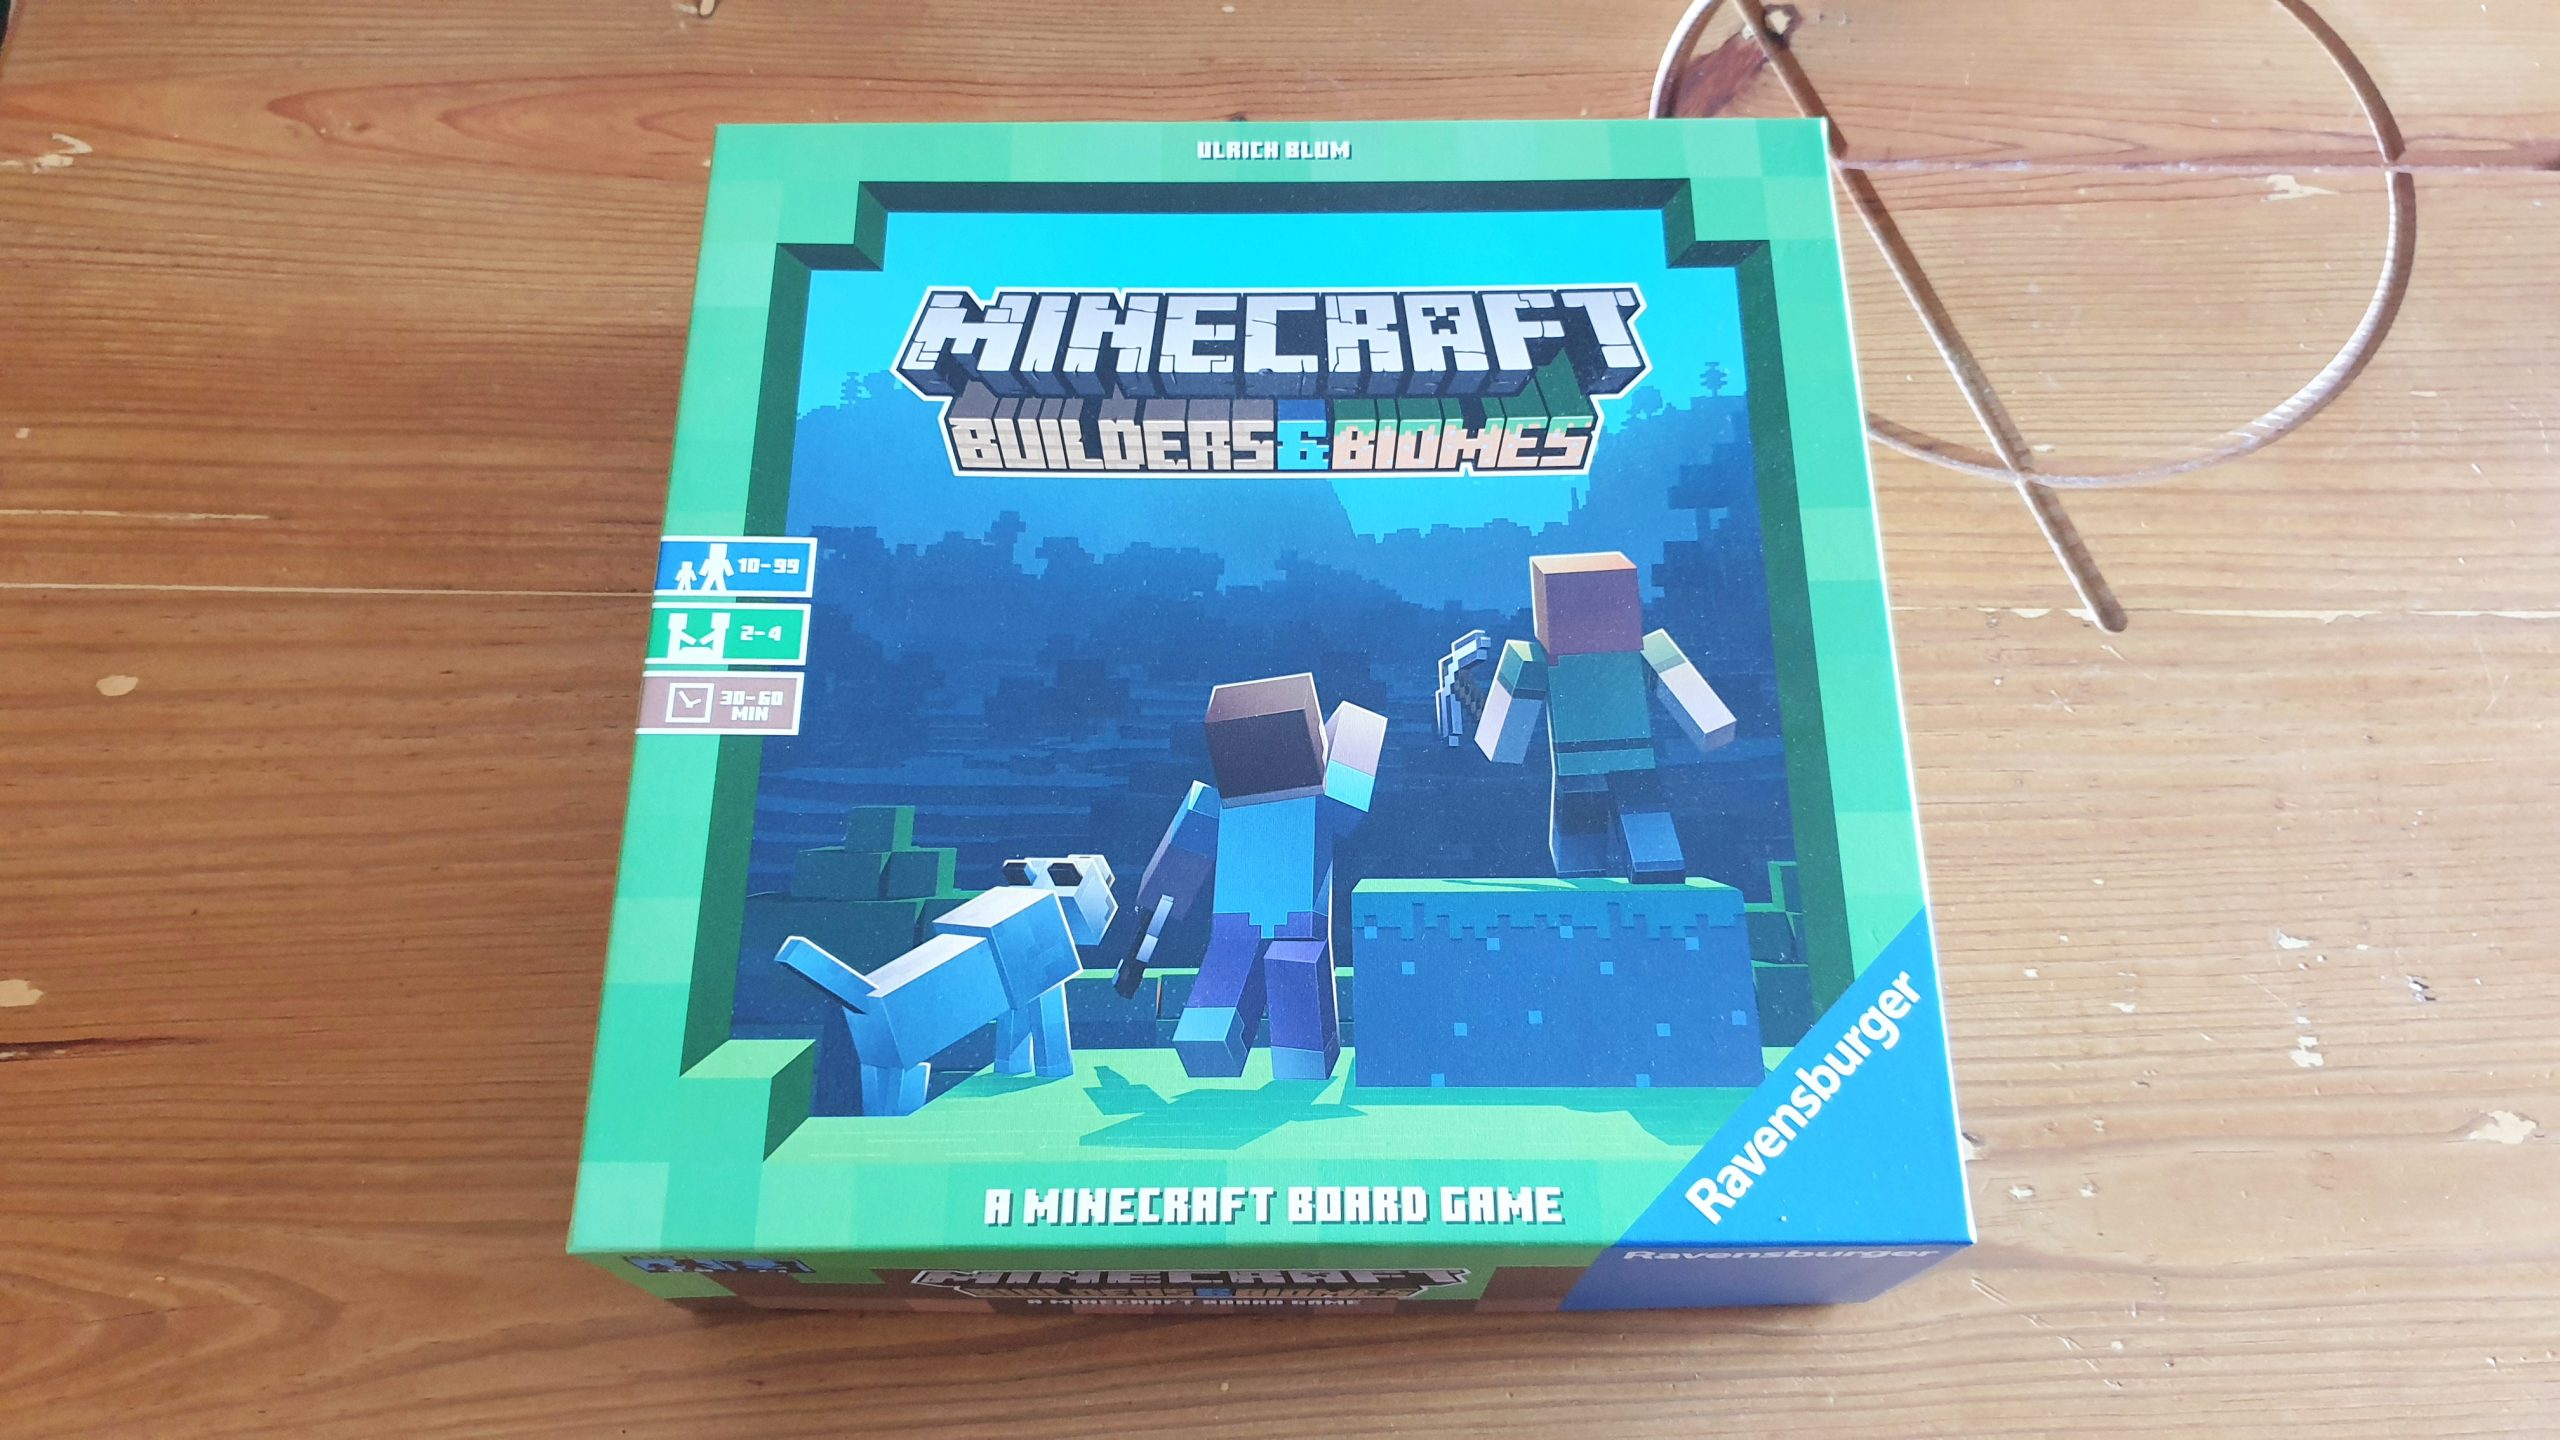 Minecraft Builders & Biomes Review